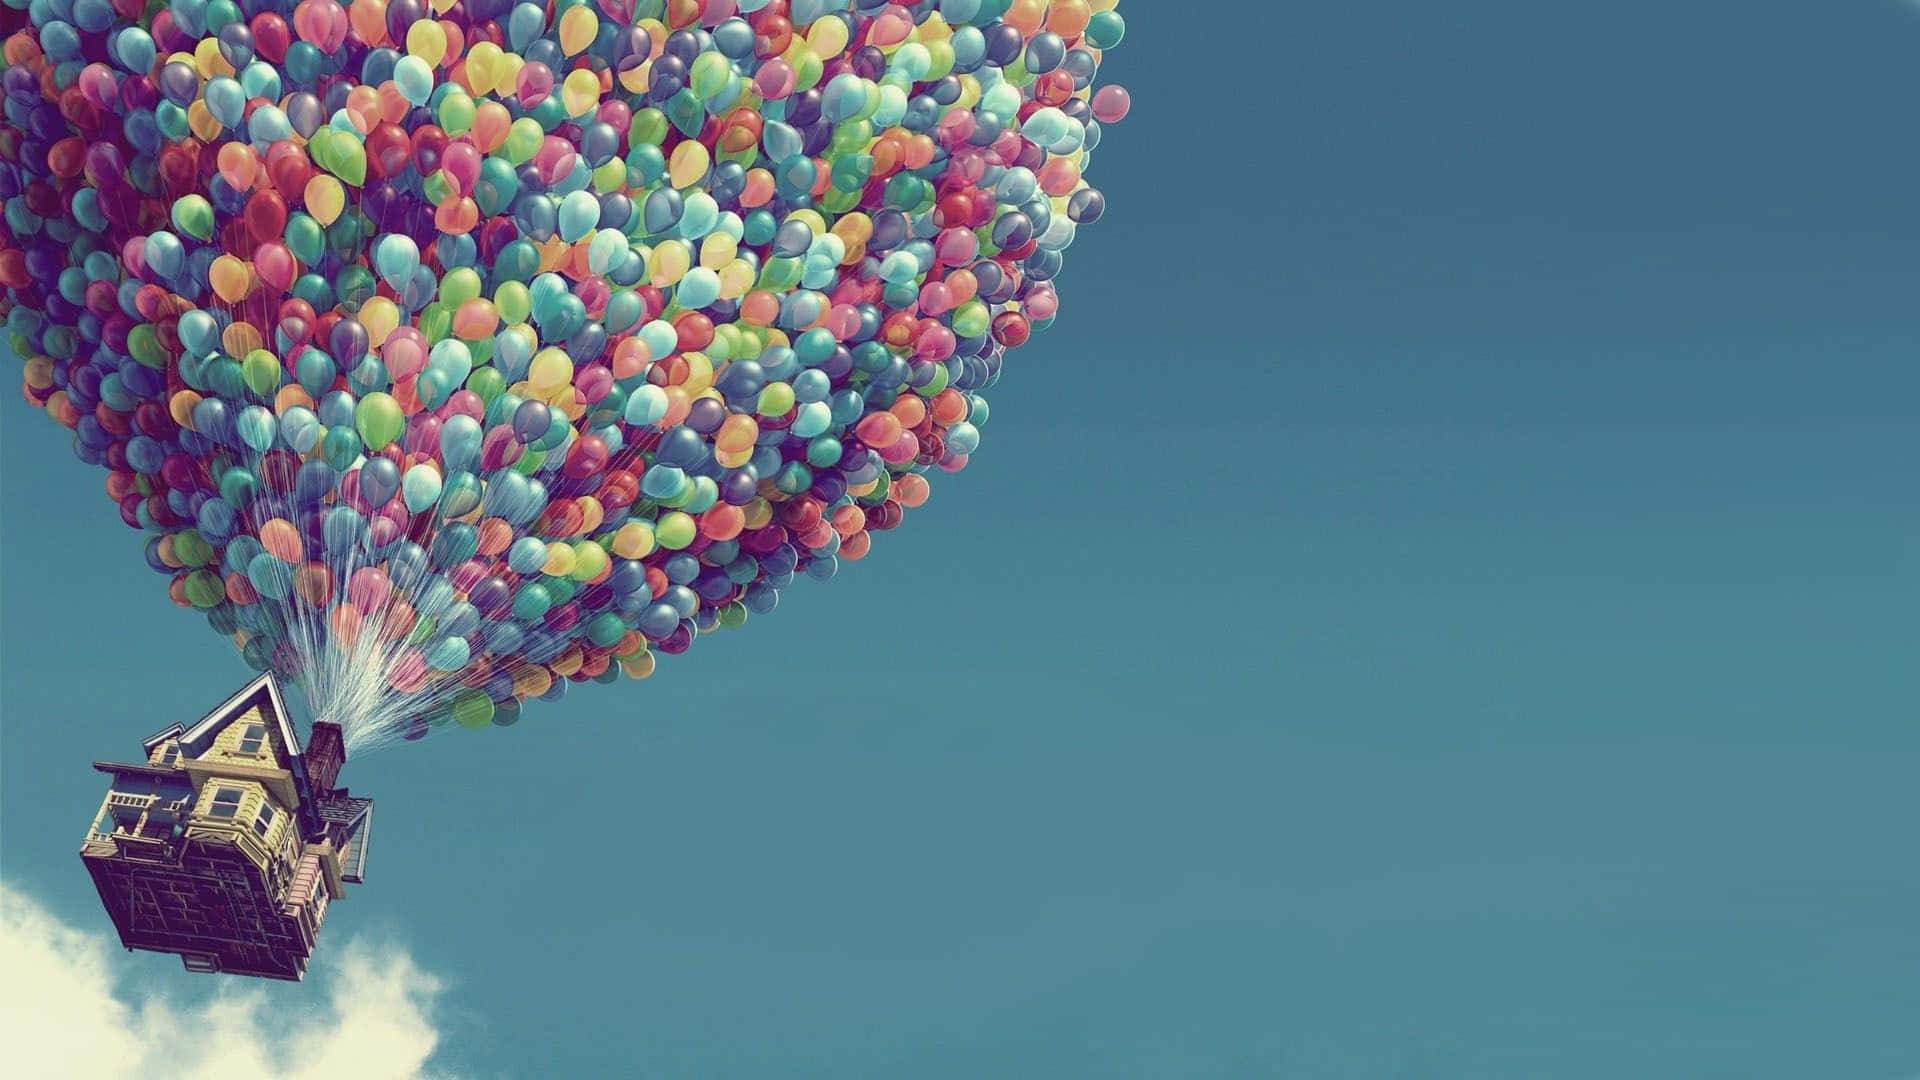 A House With Balloons Flying In The Sky